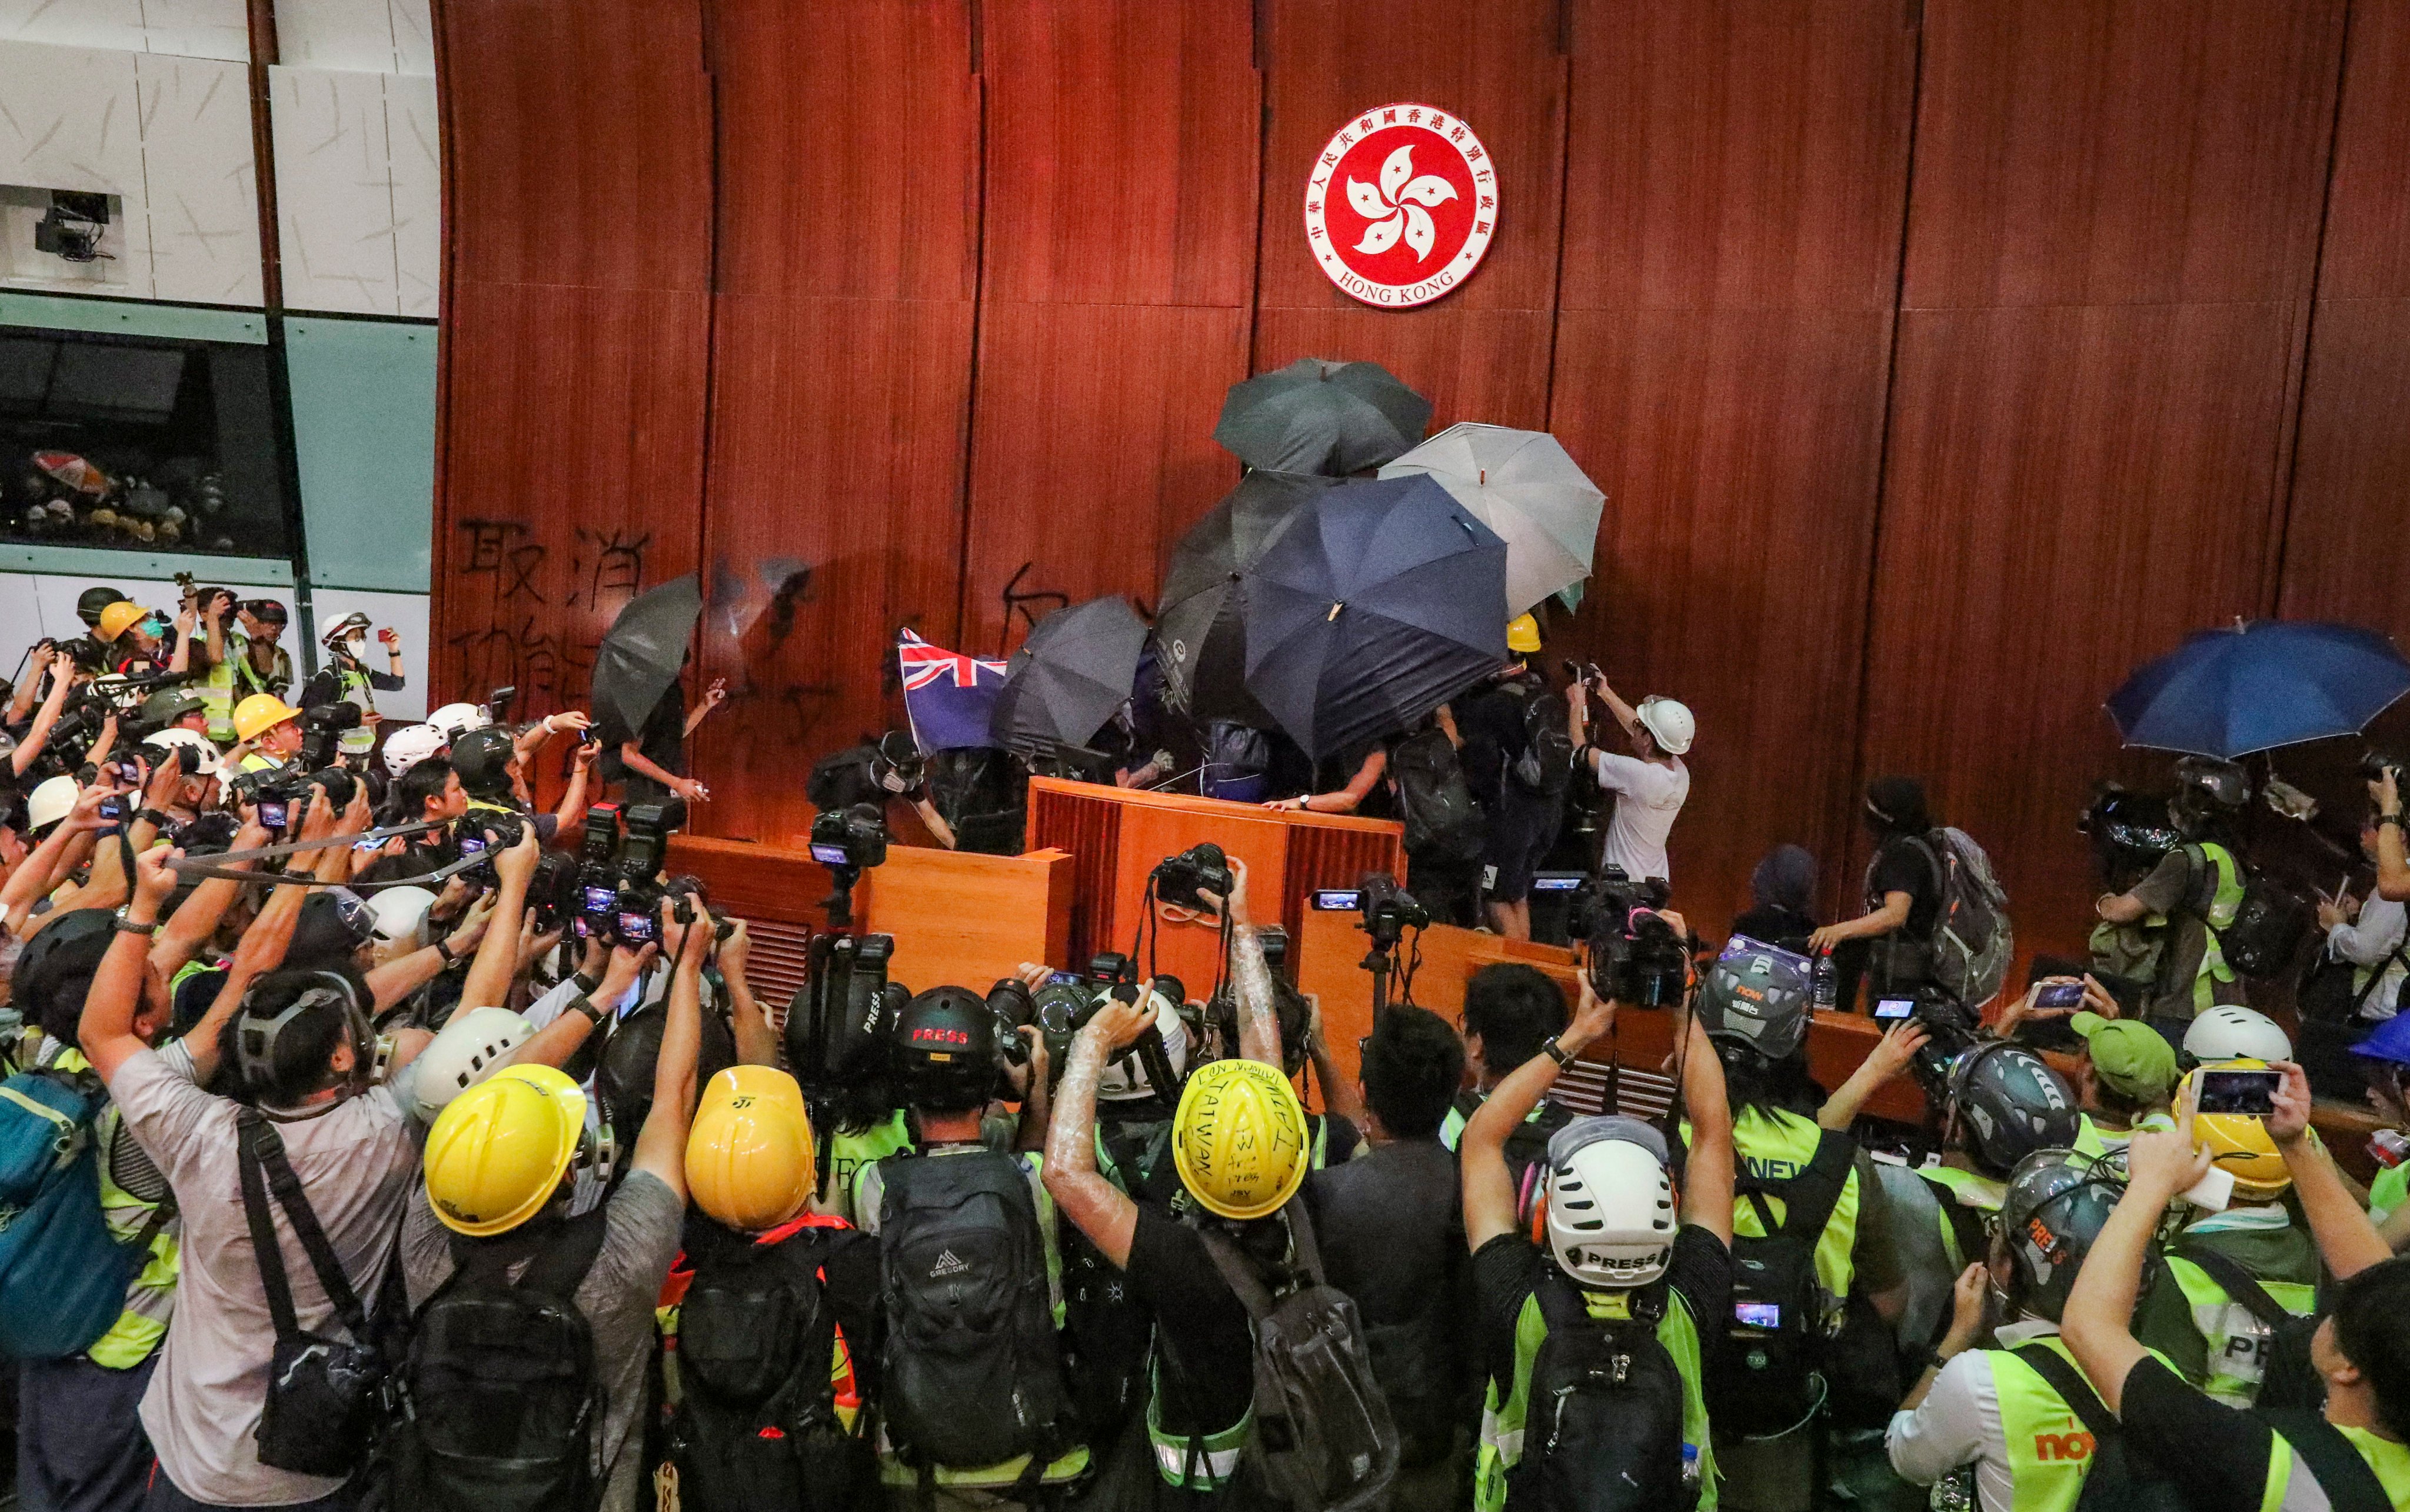 Political activists at the Legislative Council complex in 2019. Hong Kong authorities expressed disapproval over a BBC report covering the sentencing of activists over the incident. Photo: Felix Wong